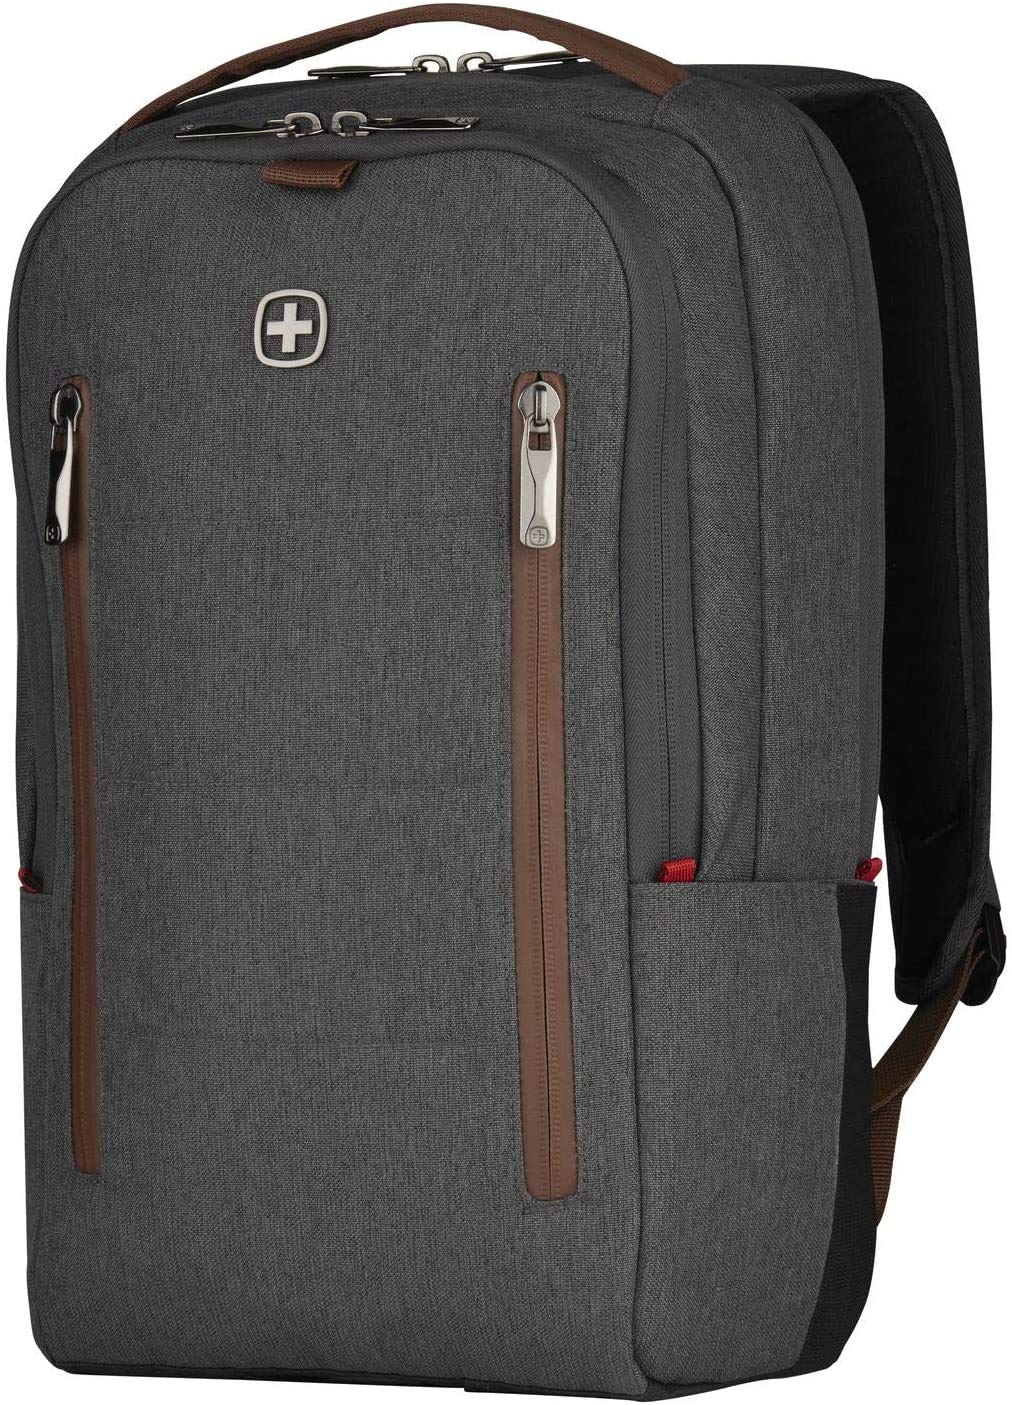 Wenger City Upgrade Laptop Backpack with Cross Body Day Bag 40.64 cm 16 Inches Grey